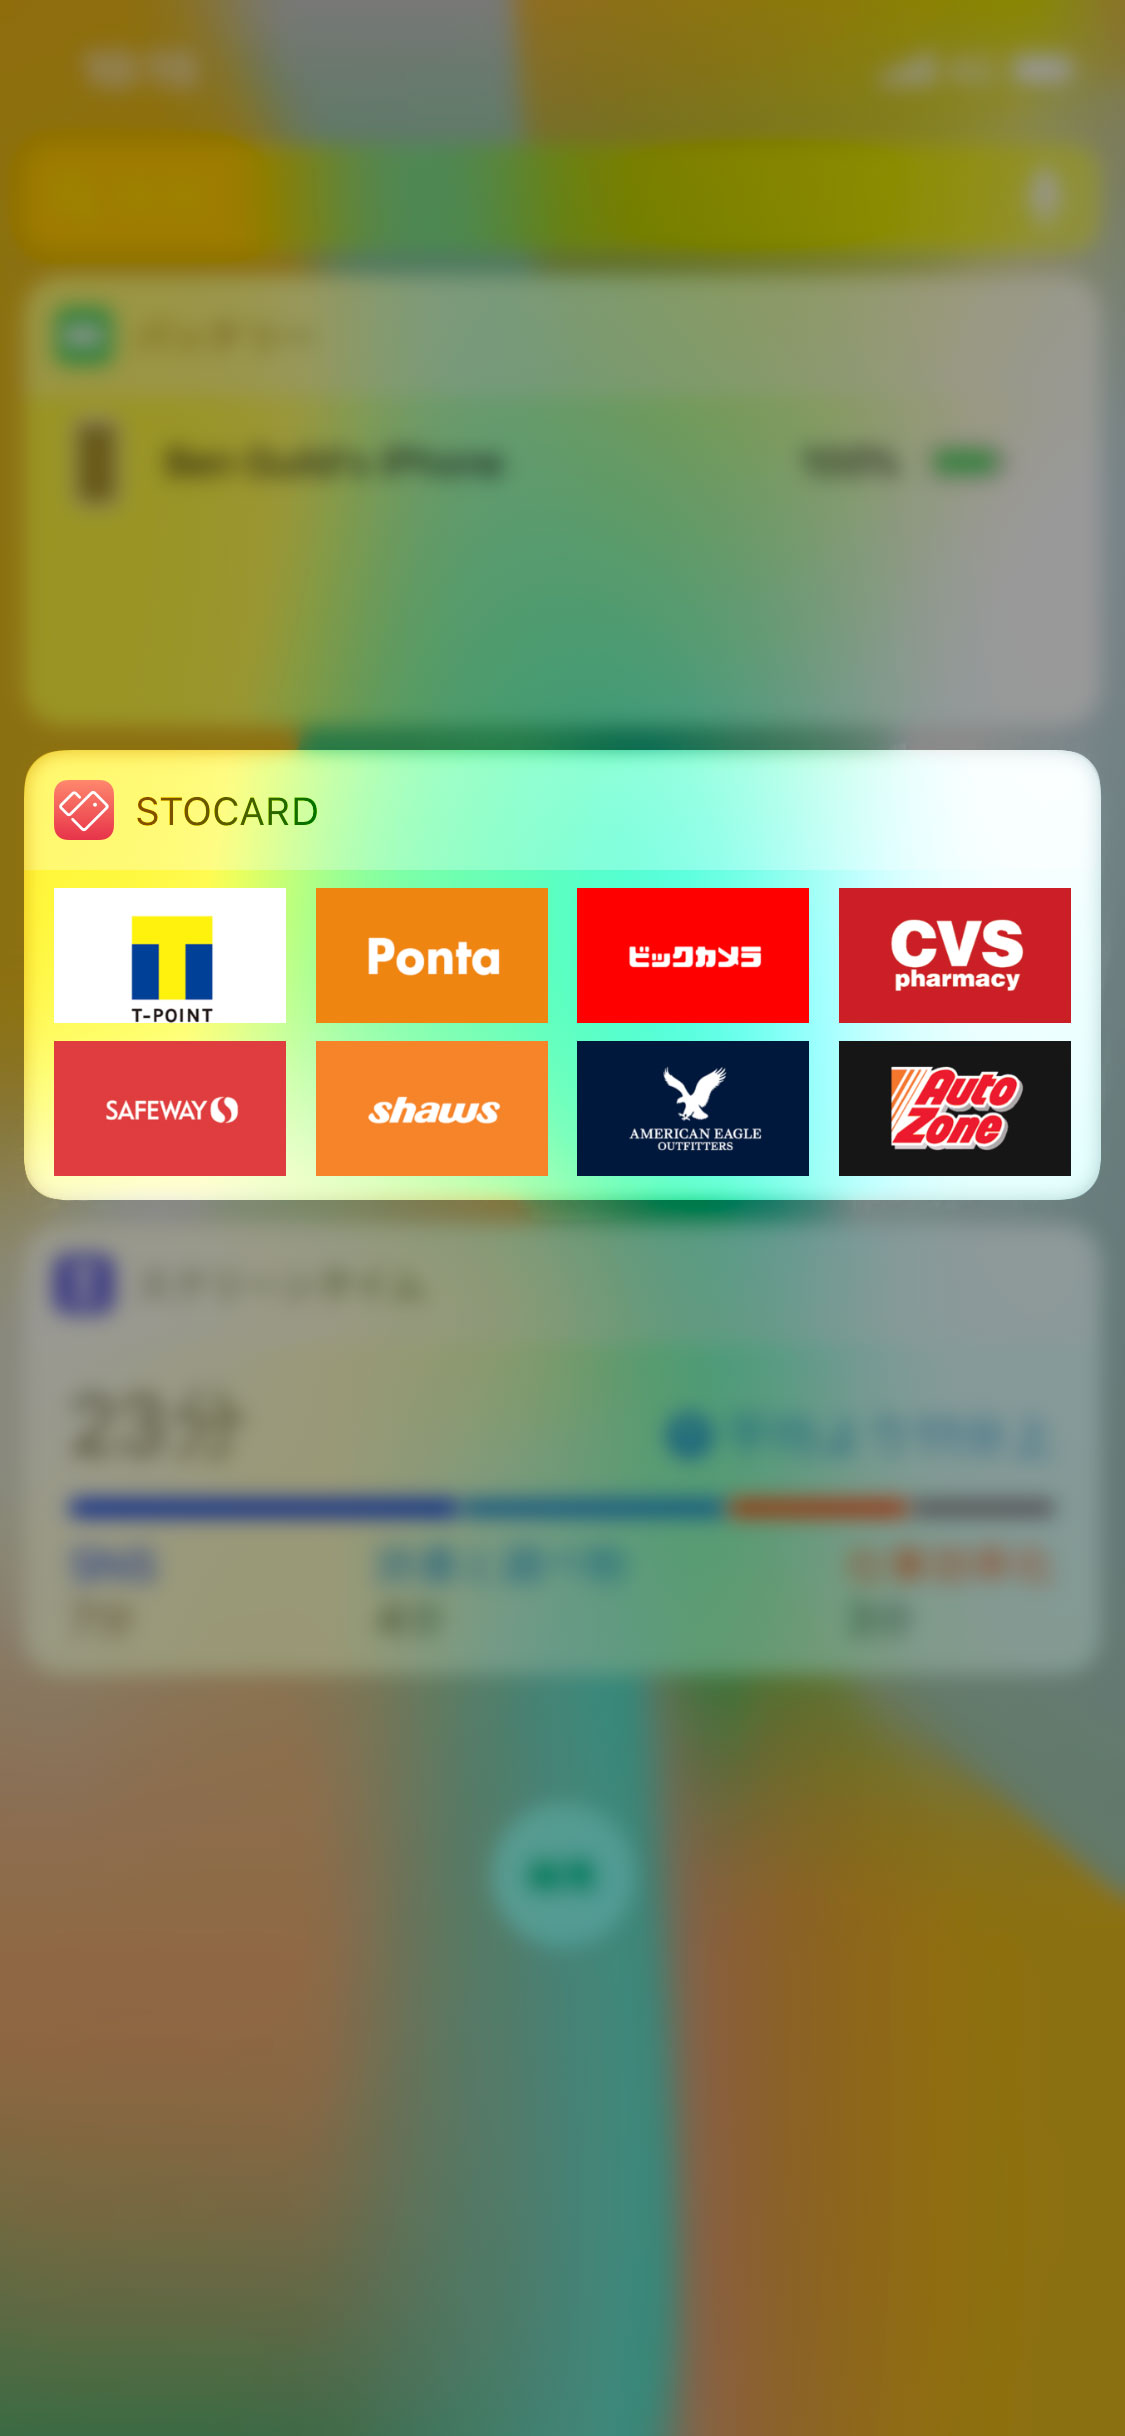 The “Today” screen widget for the Stocard app.